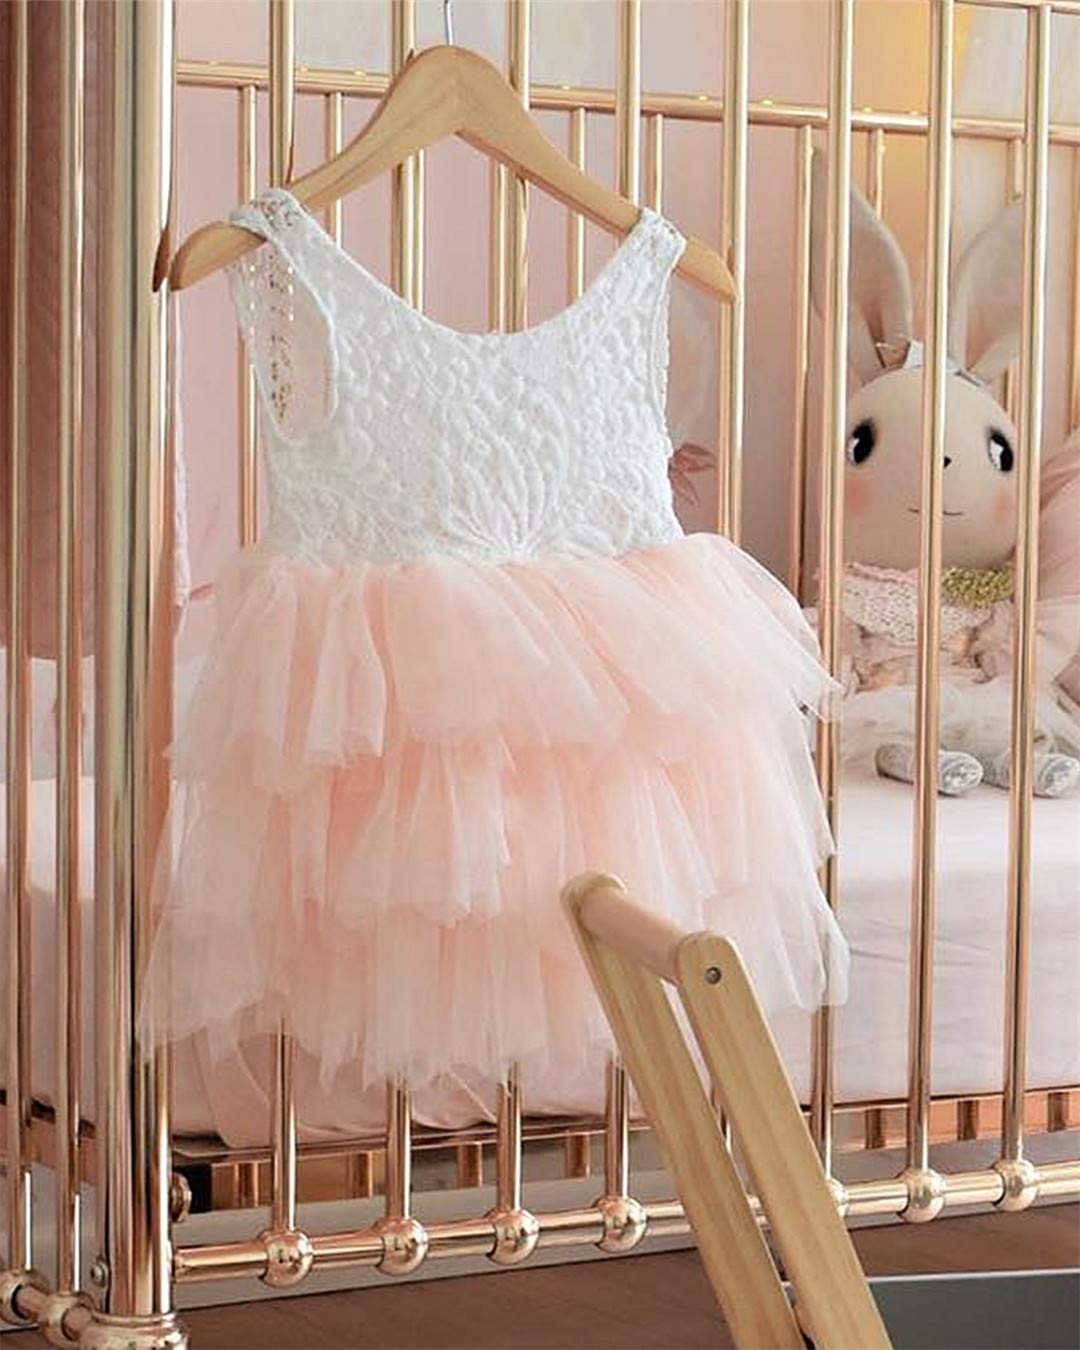 2Bunnies Flower Girl Dress Peony Lace Back A-Line Sleeveless Tiered Tulle Short (Pink No Applique) - 2BUNNIES